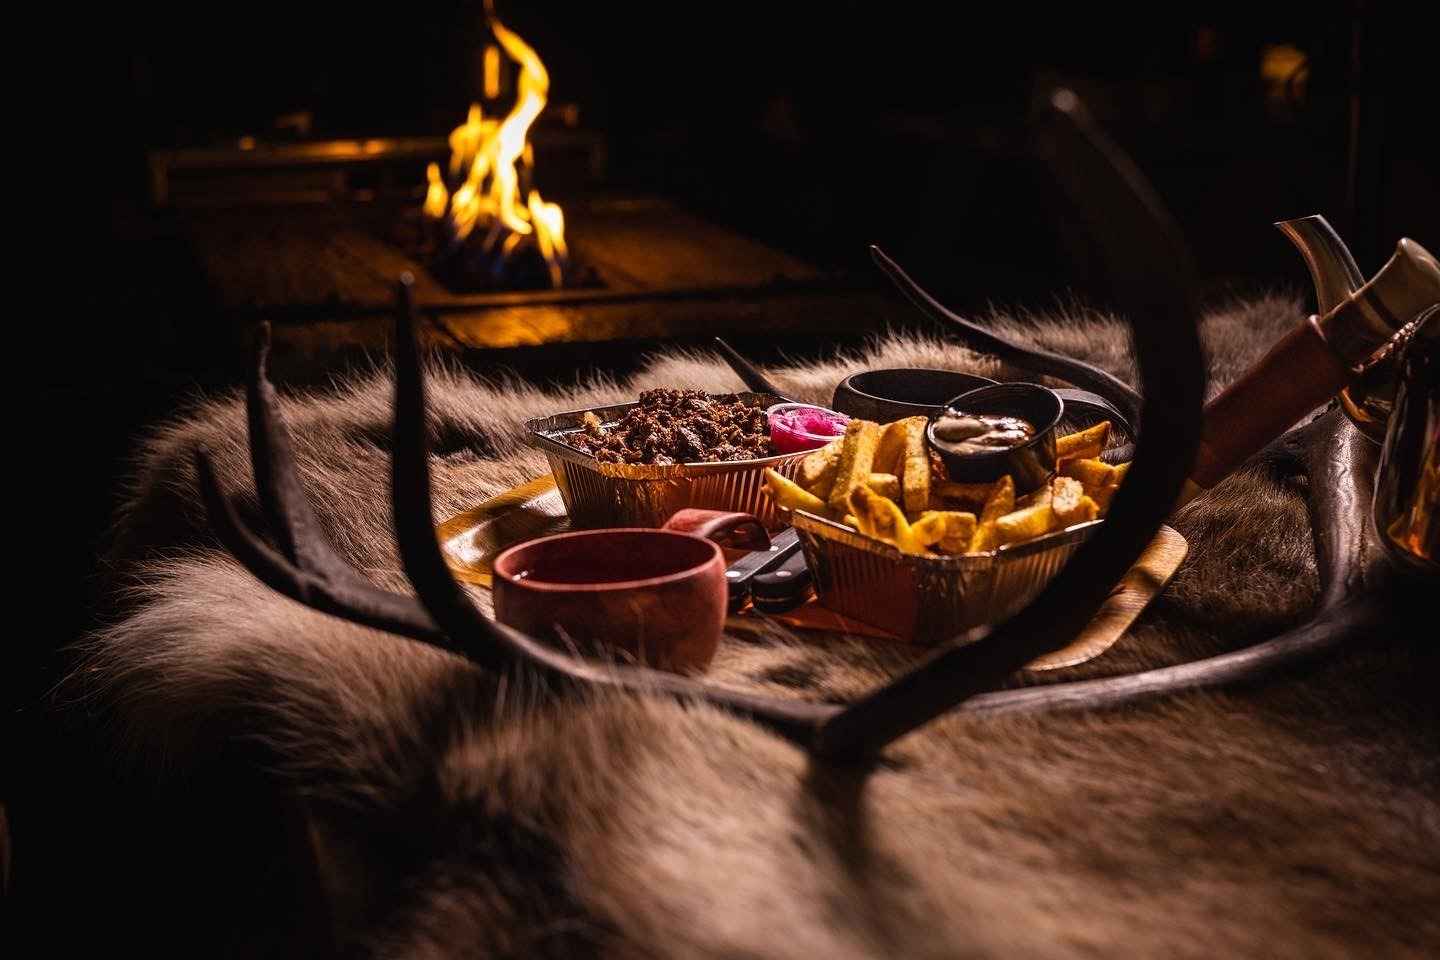 Food served in front of a fireplace in a lavvu.